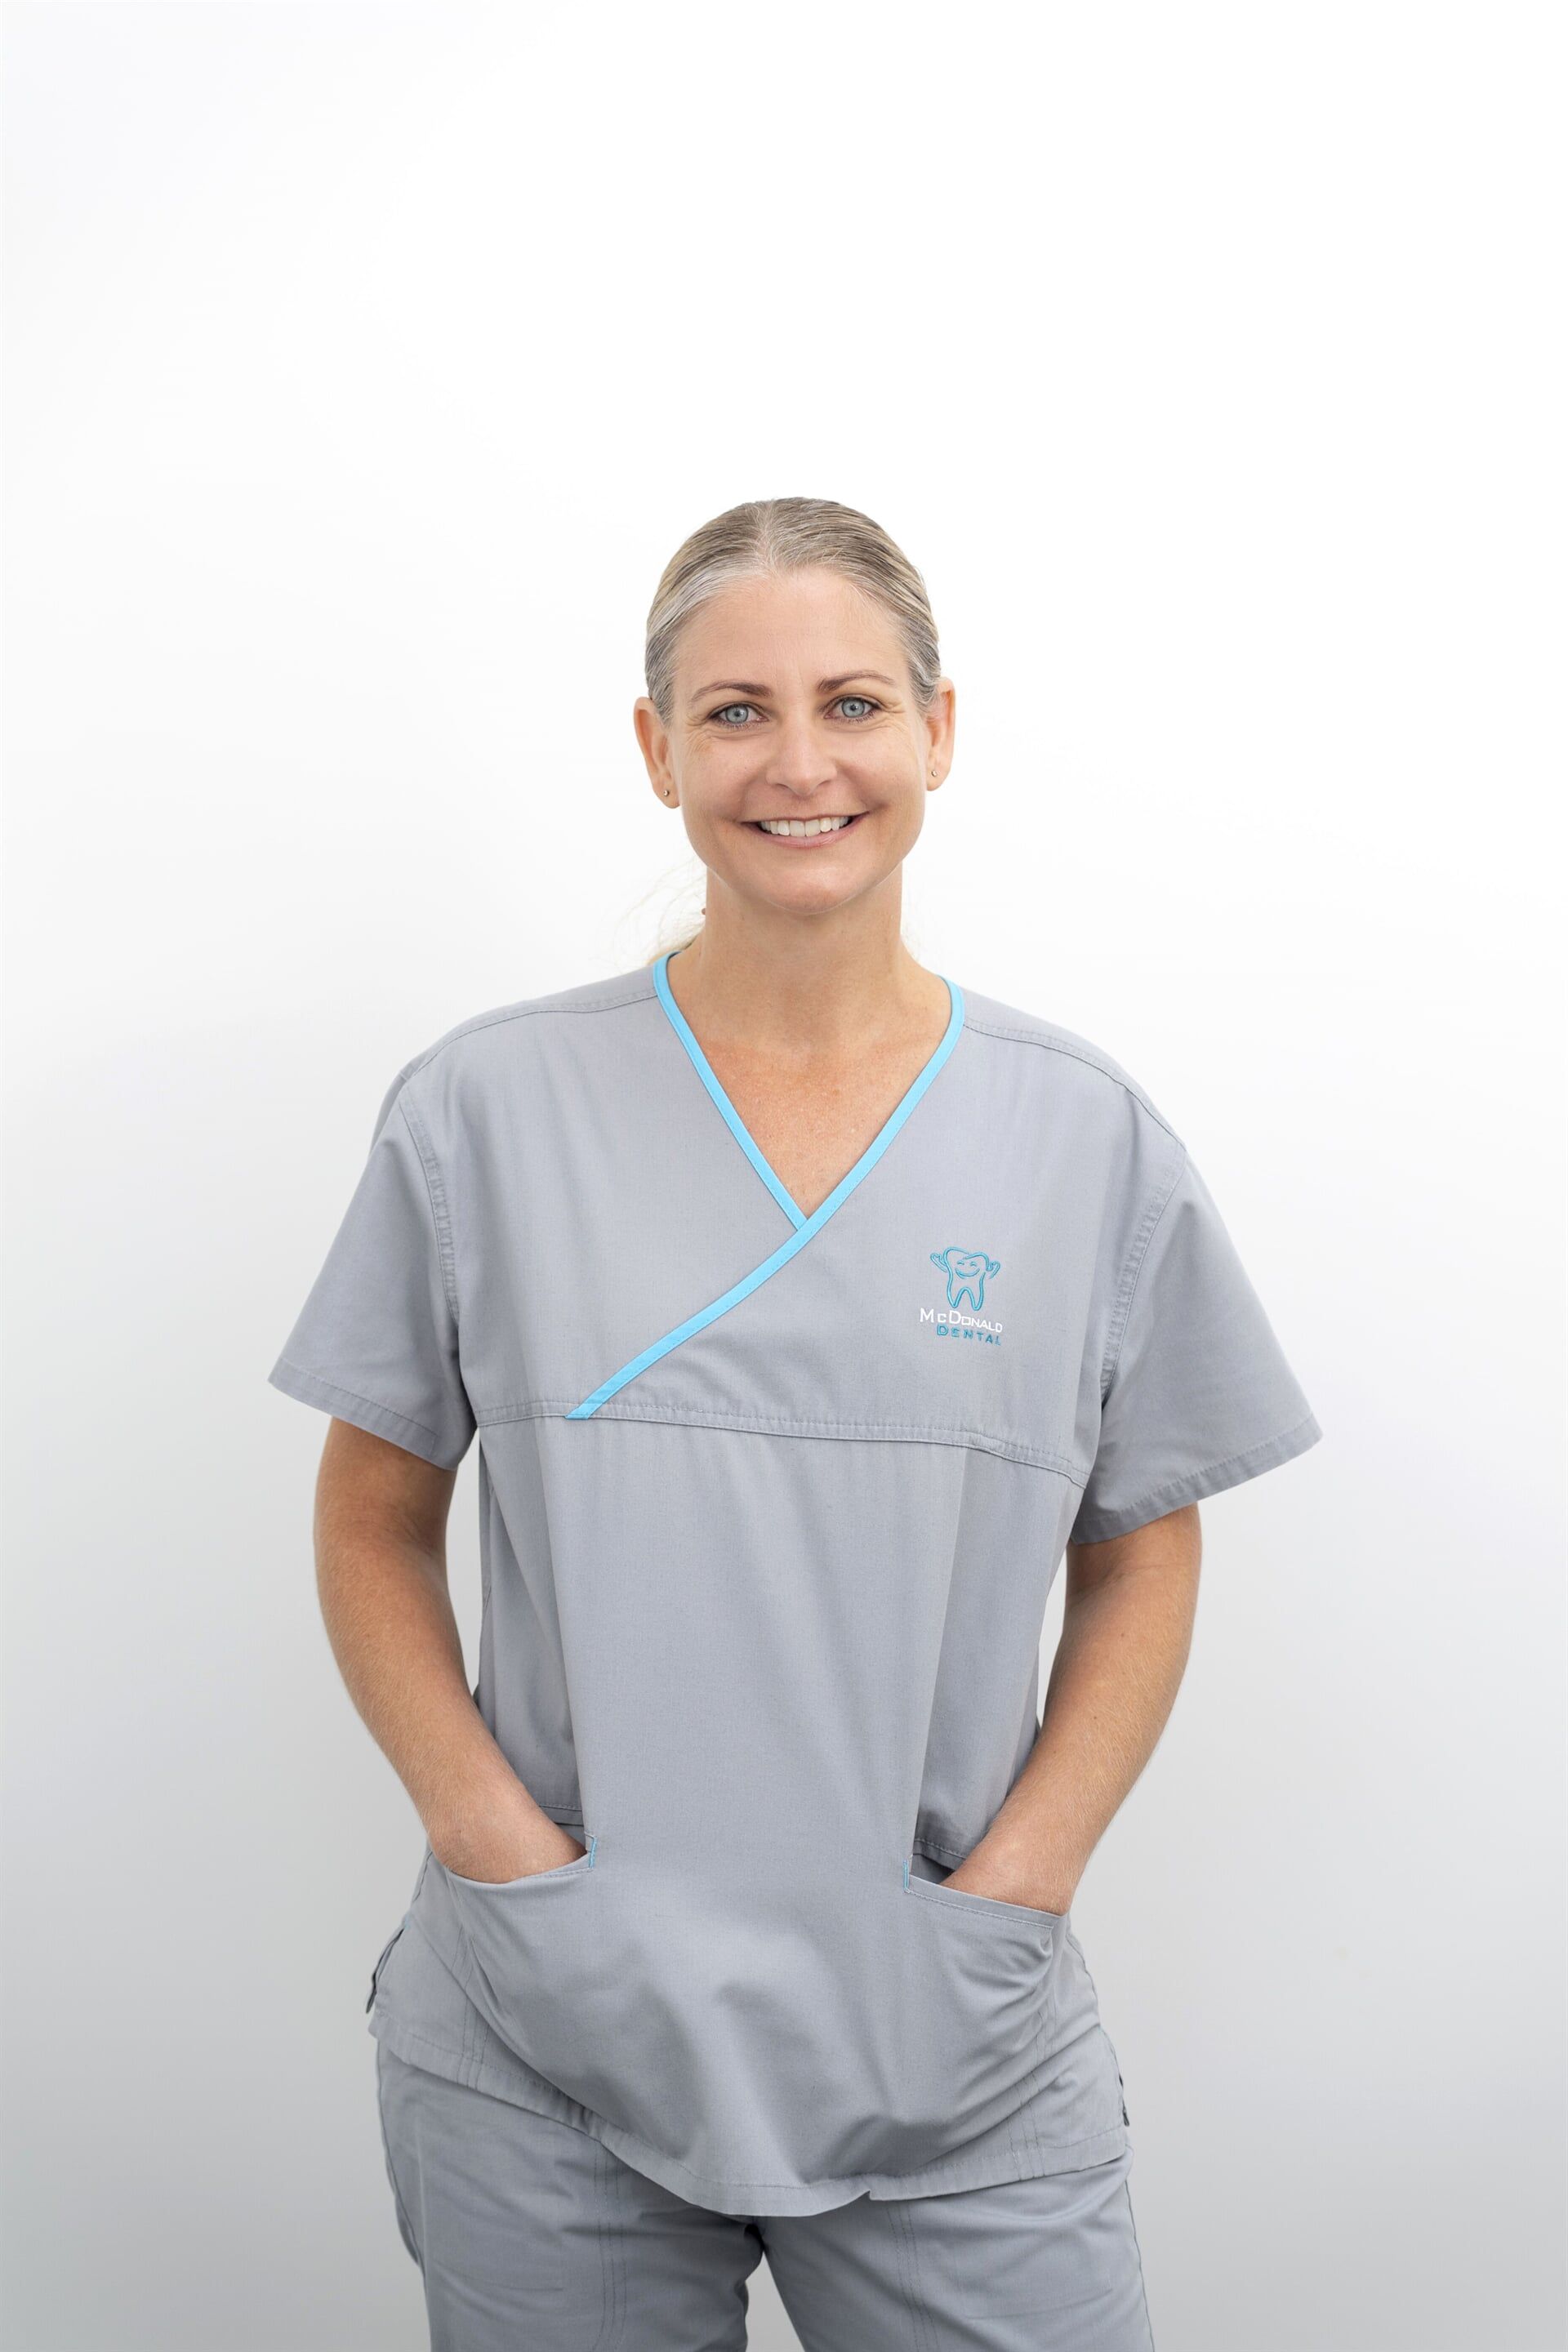 Jayde Nable — Dental Services in Gympie, QLD